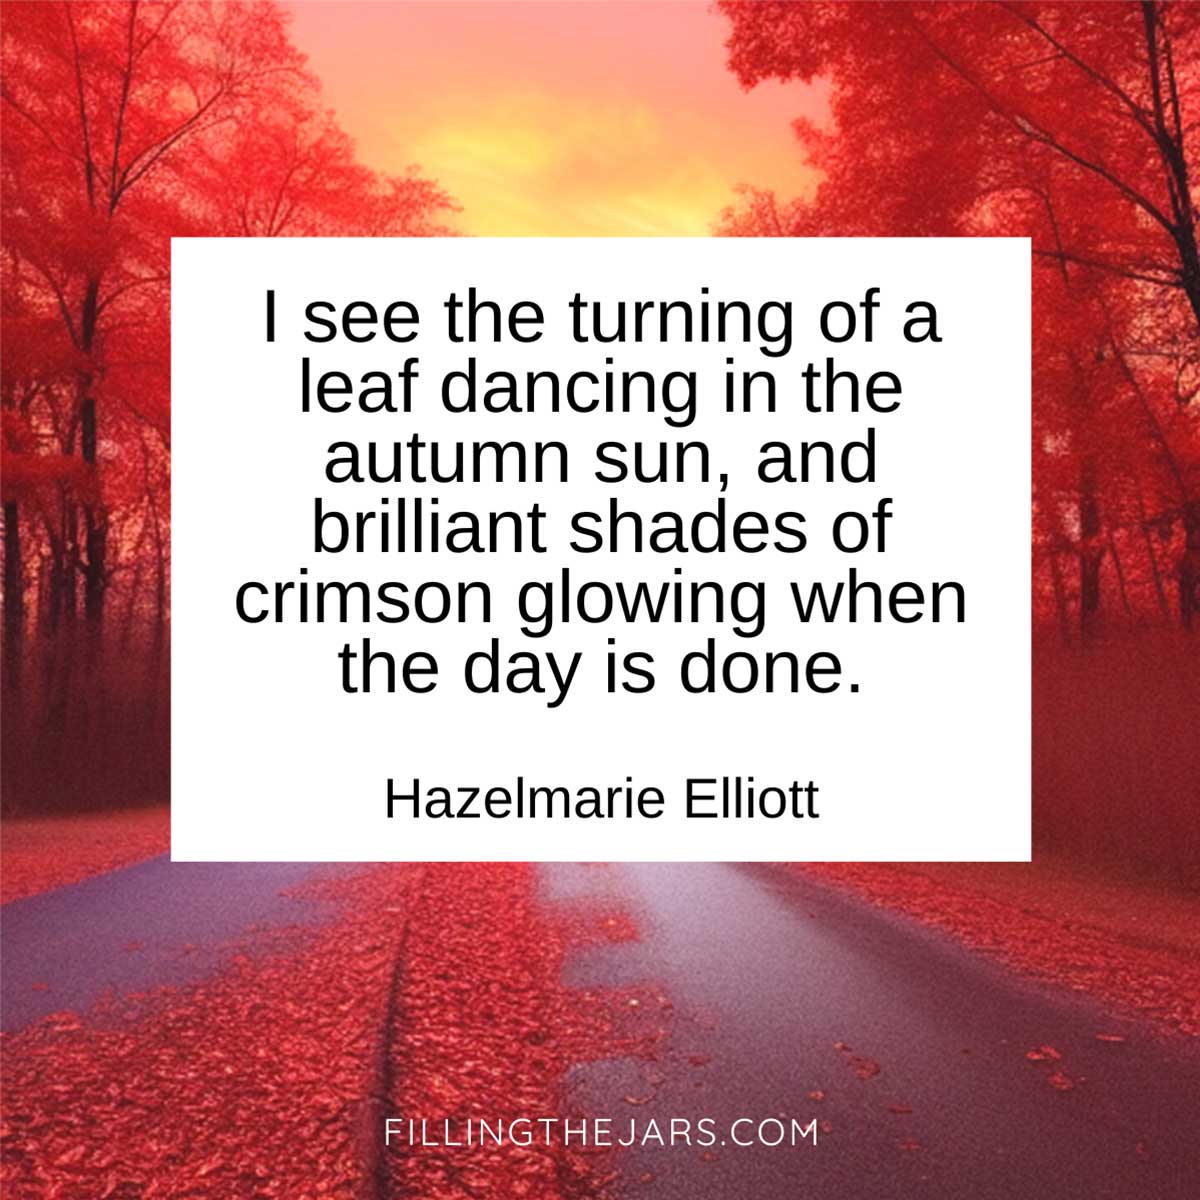 Hazelmarie Elliott crimson glowing sunset quote on white background over winding road with red autumn trees at sunset.